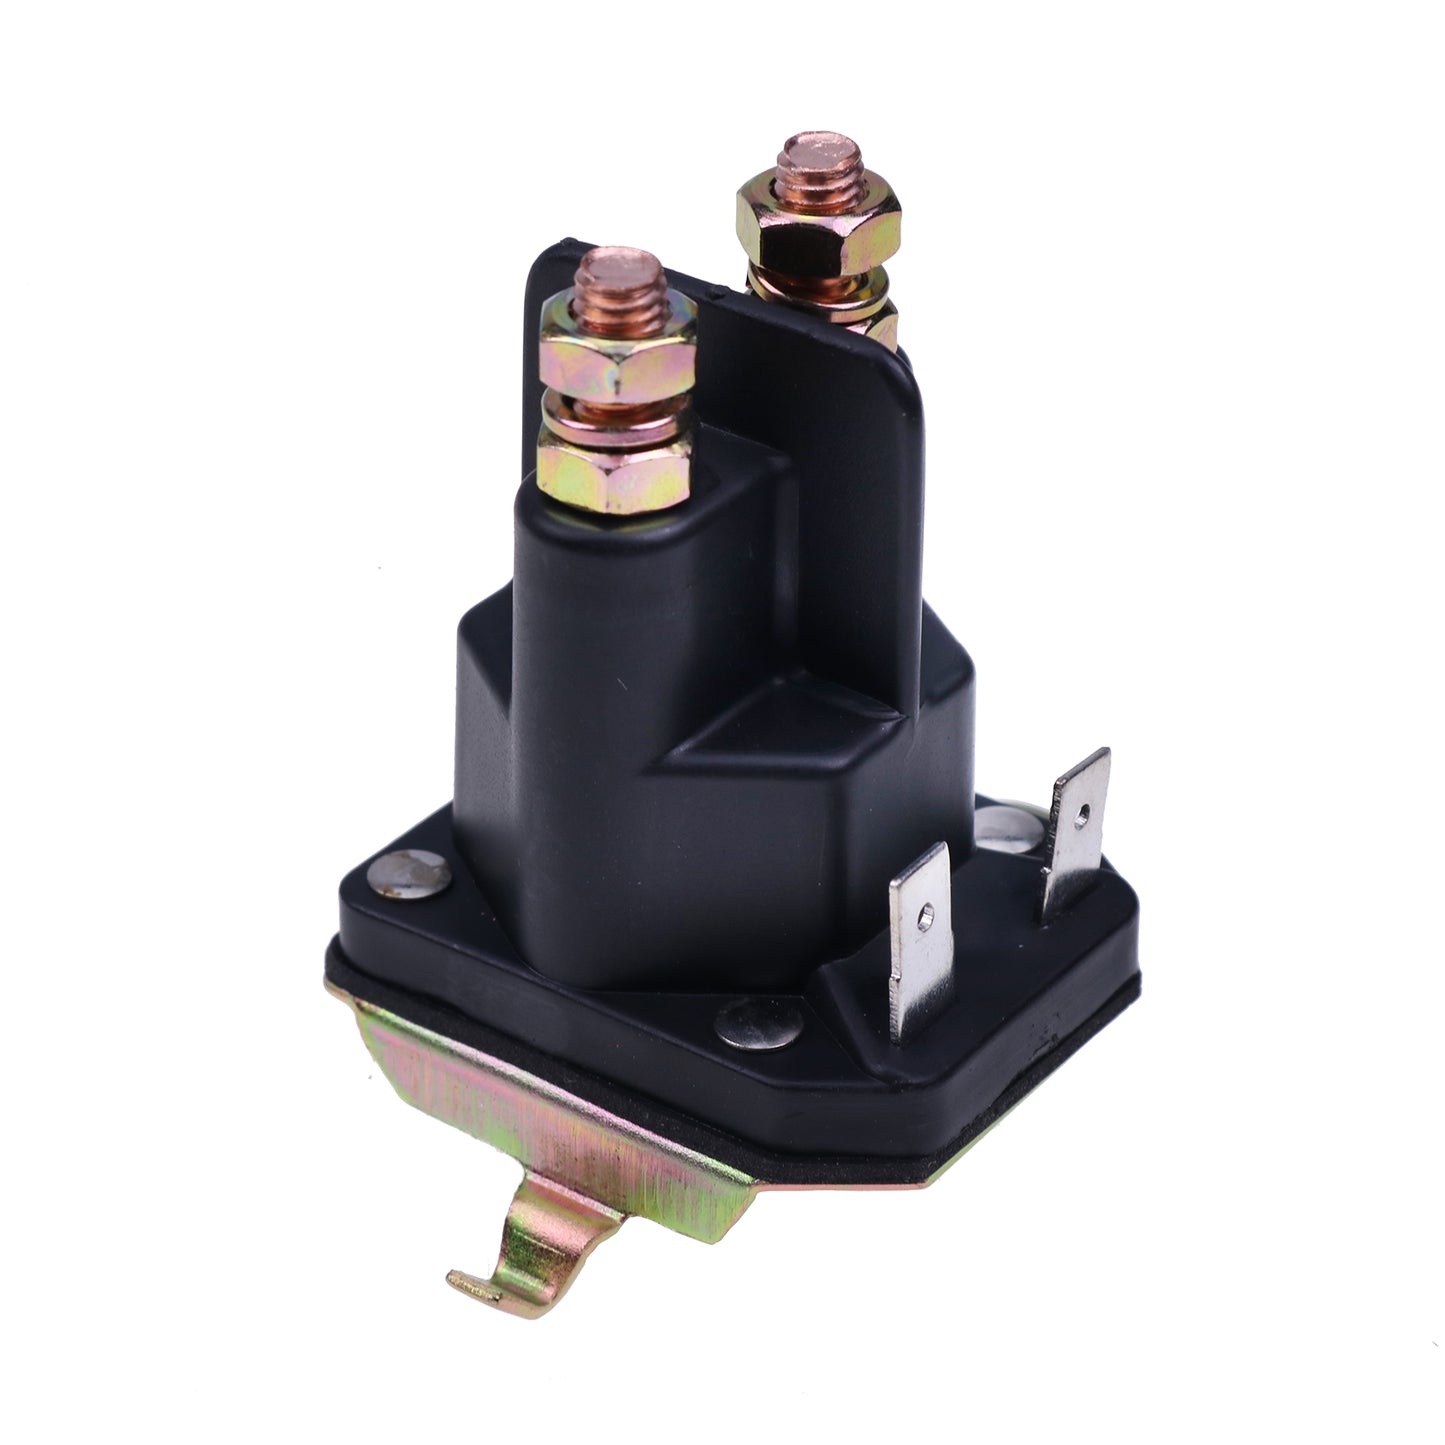 New Lawn Mower Solenoid Relay 762-1261-211-50 762-1261-211-51 Compatible with Trombetta Craftsman for Cub Cadet MTD RZT Z-Force AYP Husqvarna